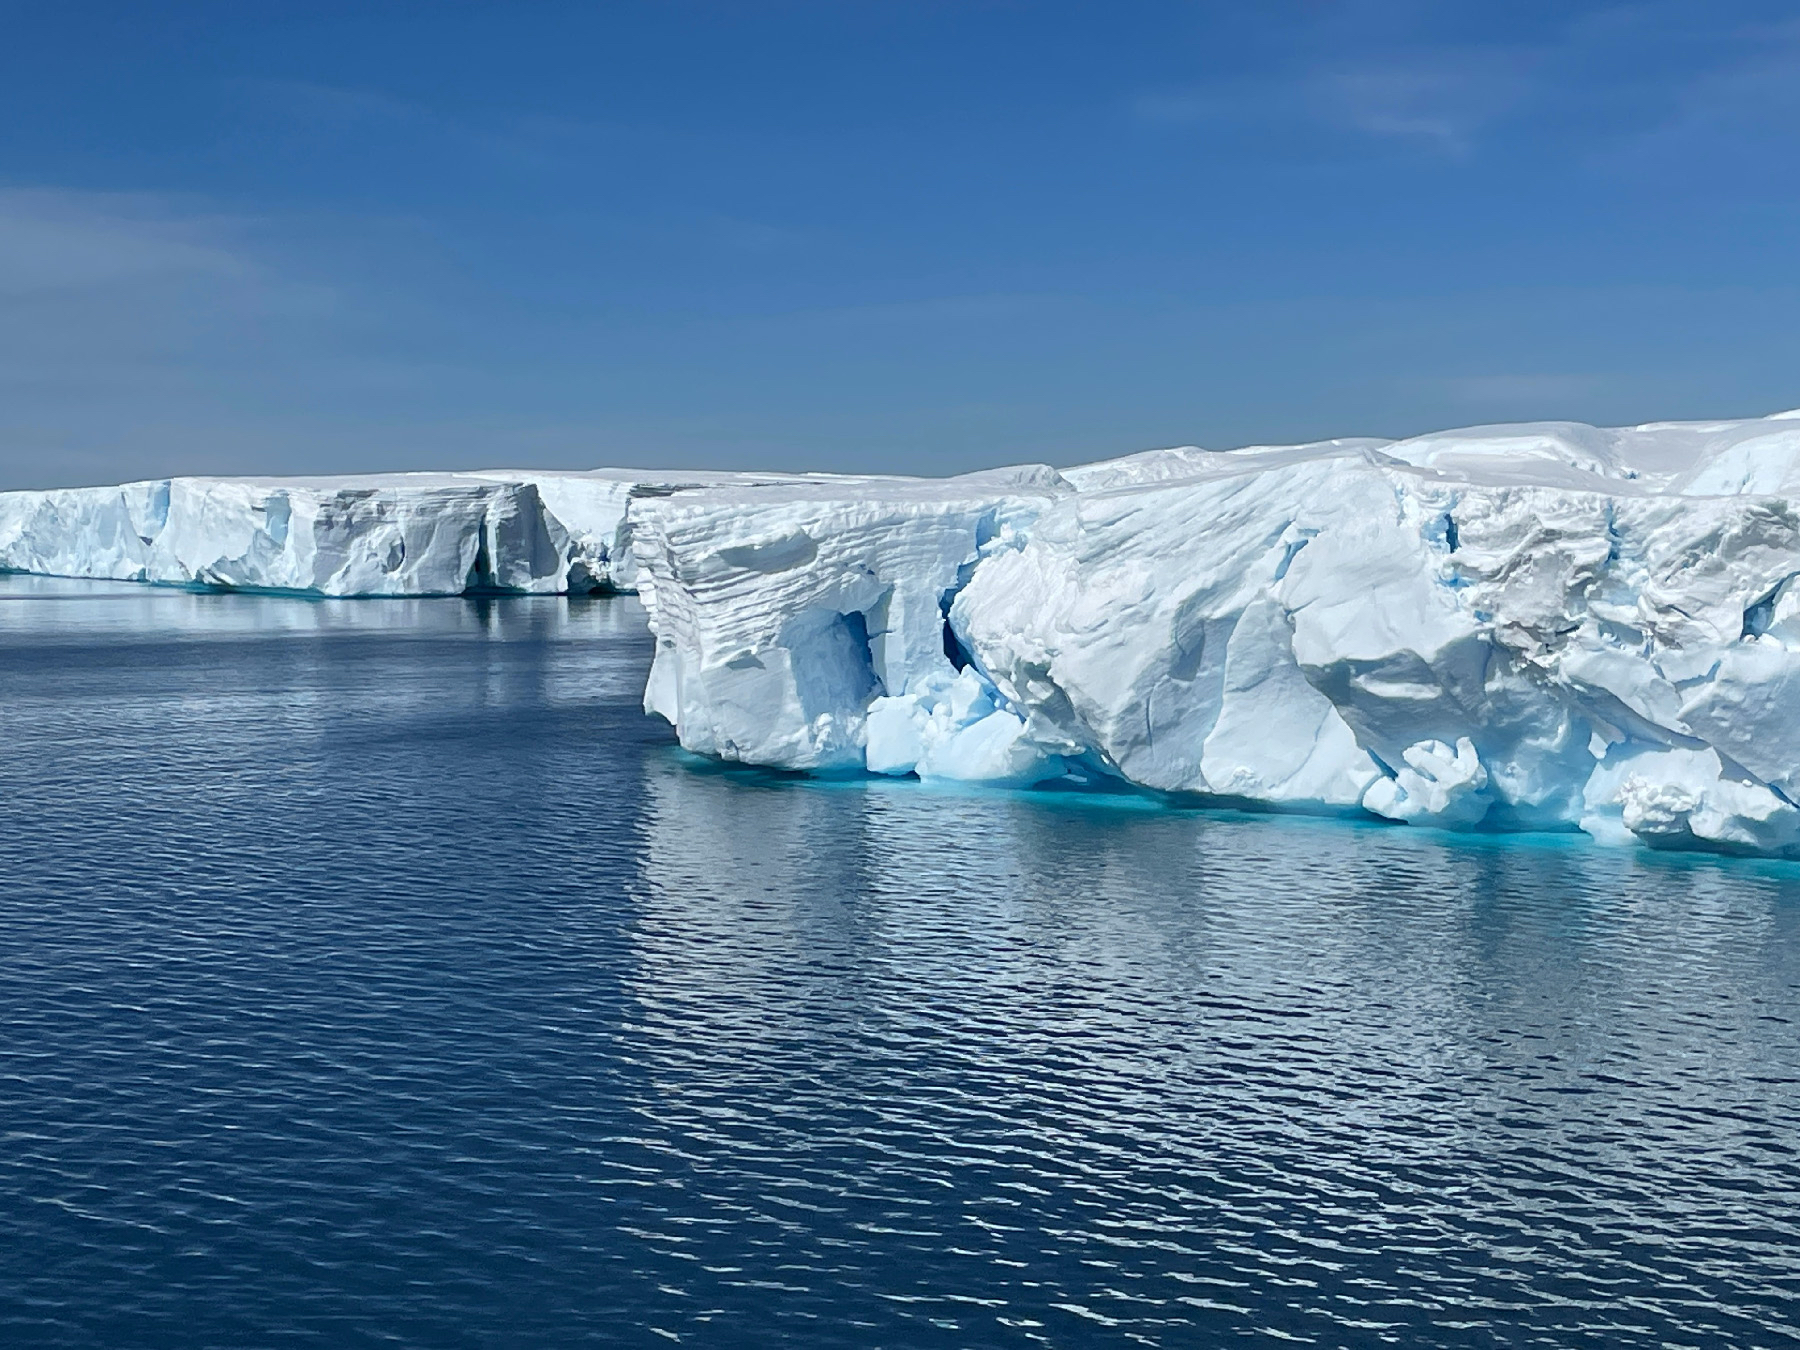 Vibrant white and blue tabular icebergs that float in the Prince Gustav Channel in Antarctica can be miles long but are quickly melting.